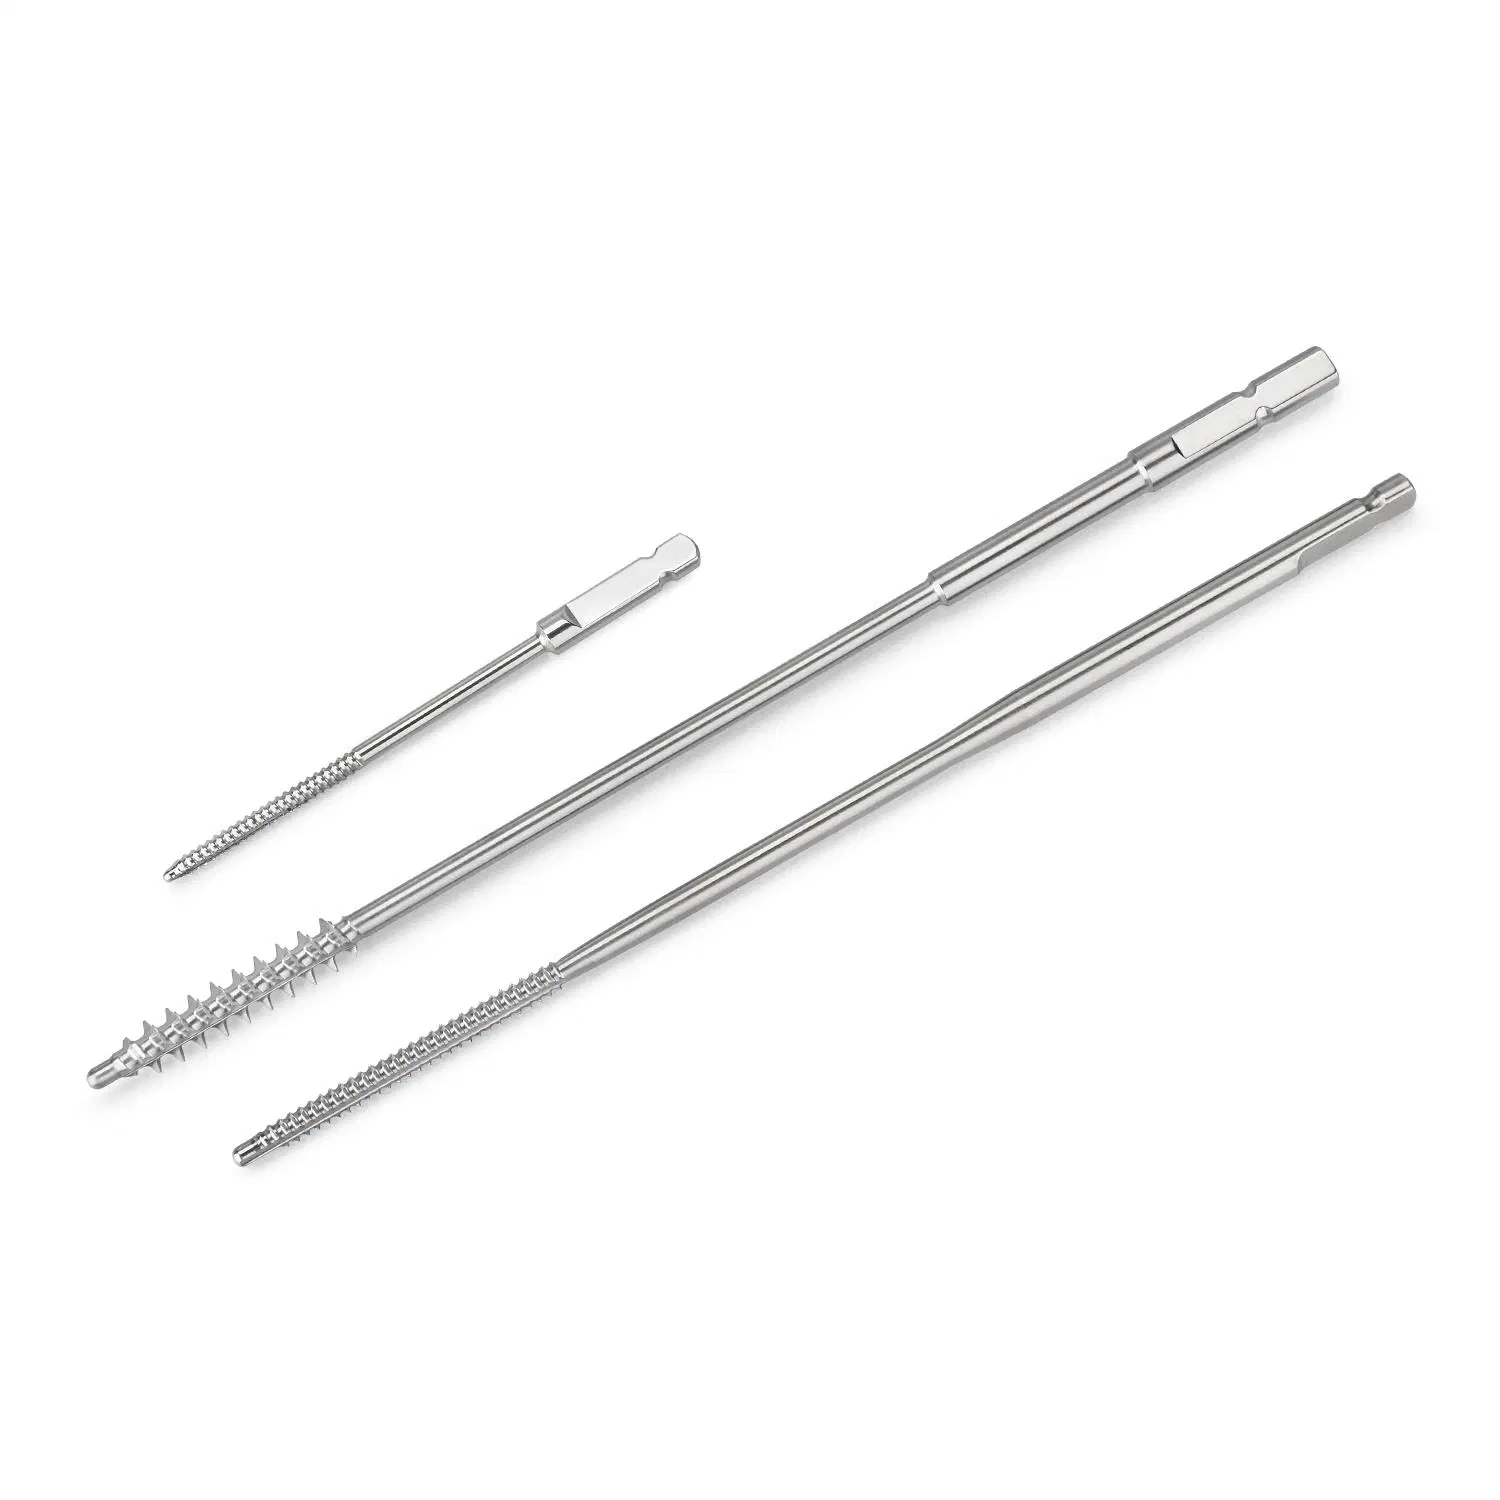 High quality/High cost performance Medical Stainless Steel Flexible Ao Quick Coupling / Twist / Straight / Normal Drill Bits for Bone Surgery